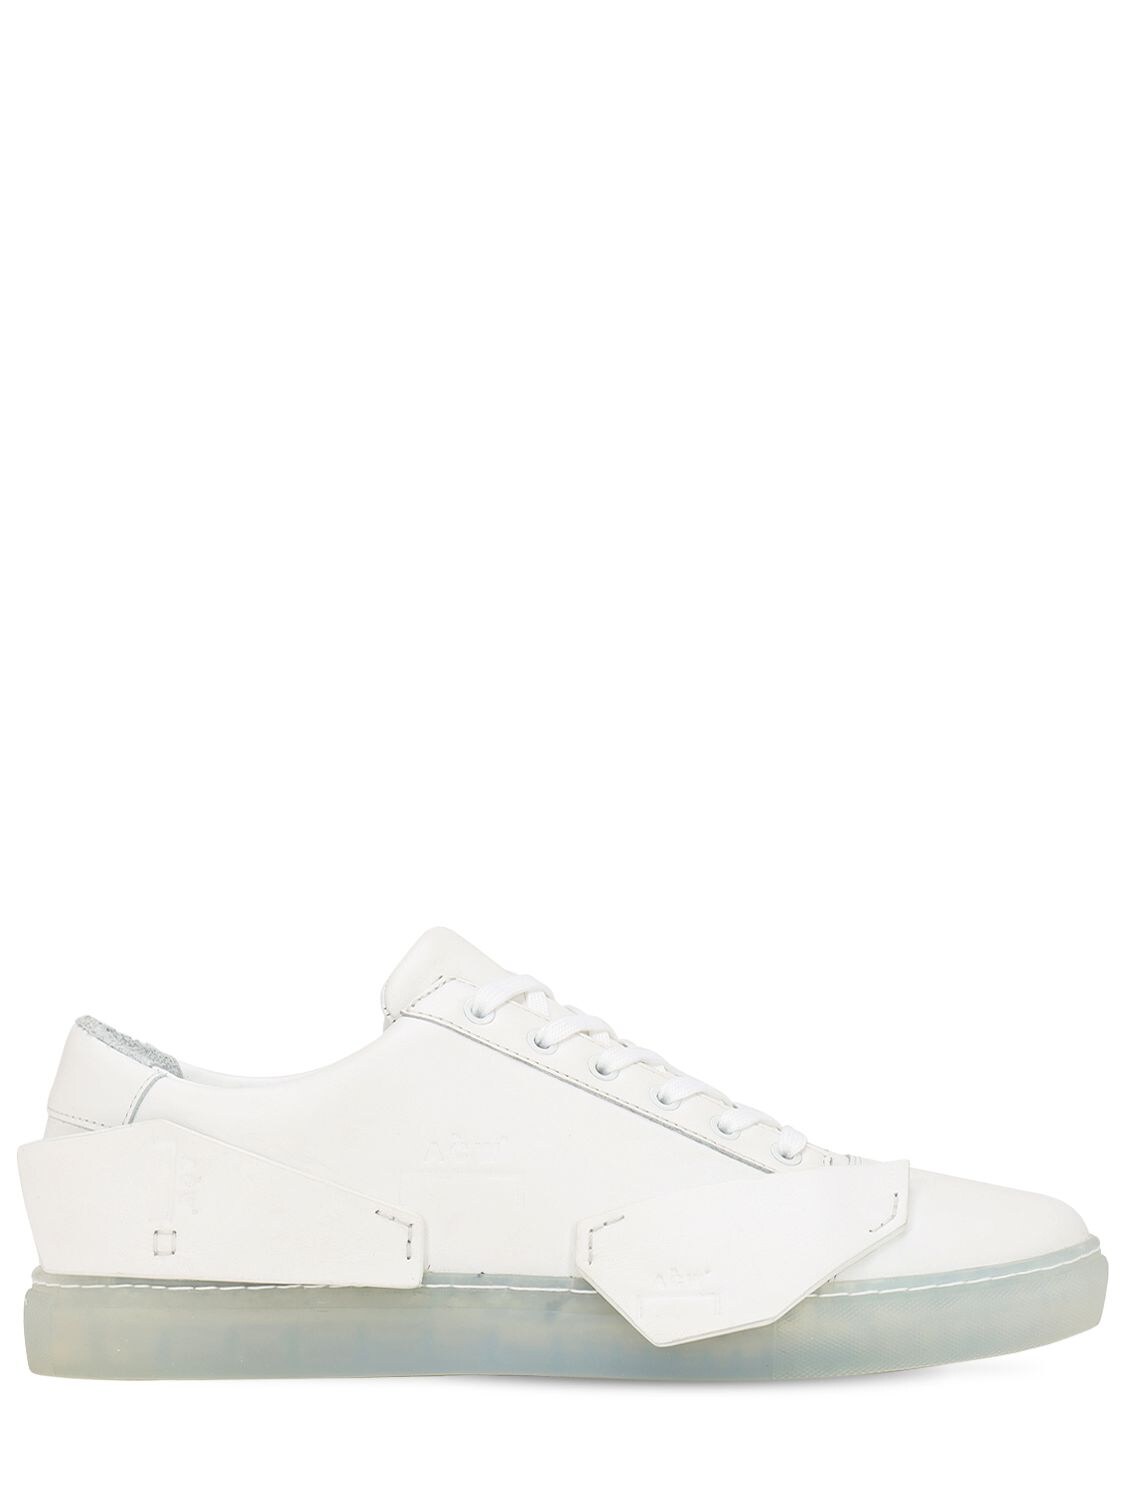 A-cold-wall* Low Top Leather Sneakers In White